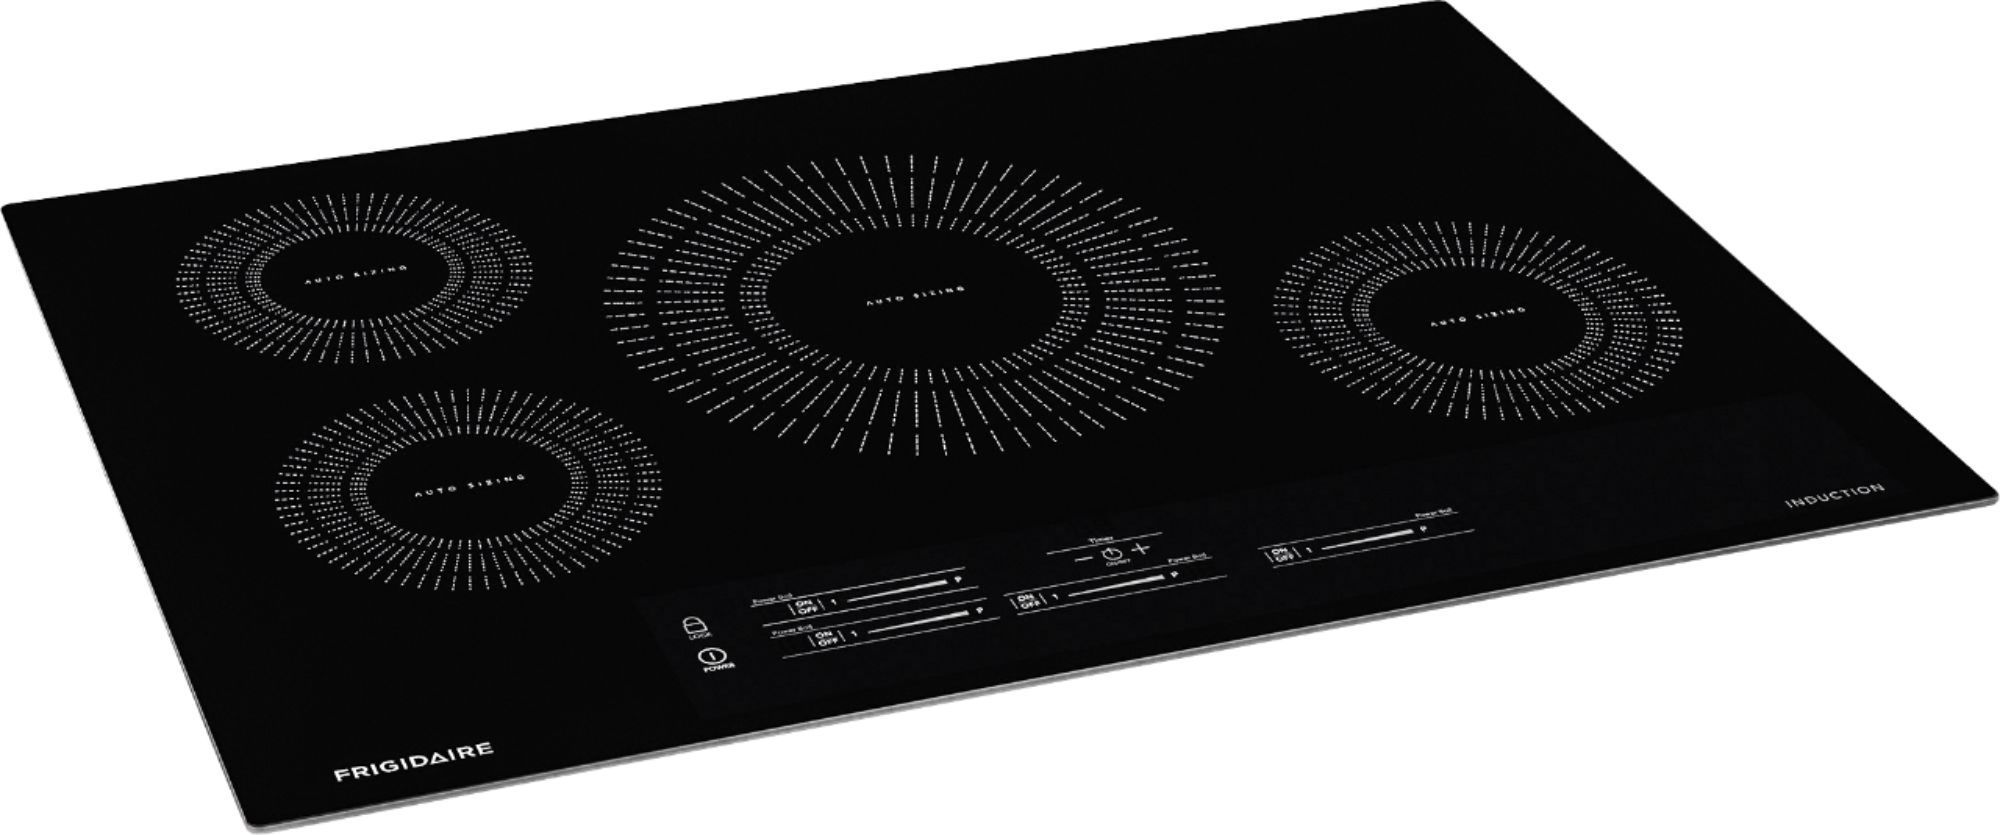 Angle View: Frigidaire - 30" Electric Induction Cooktop - Black